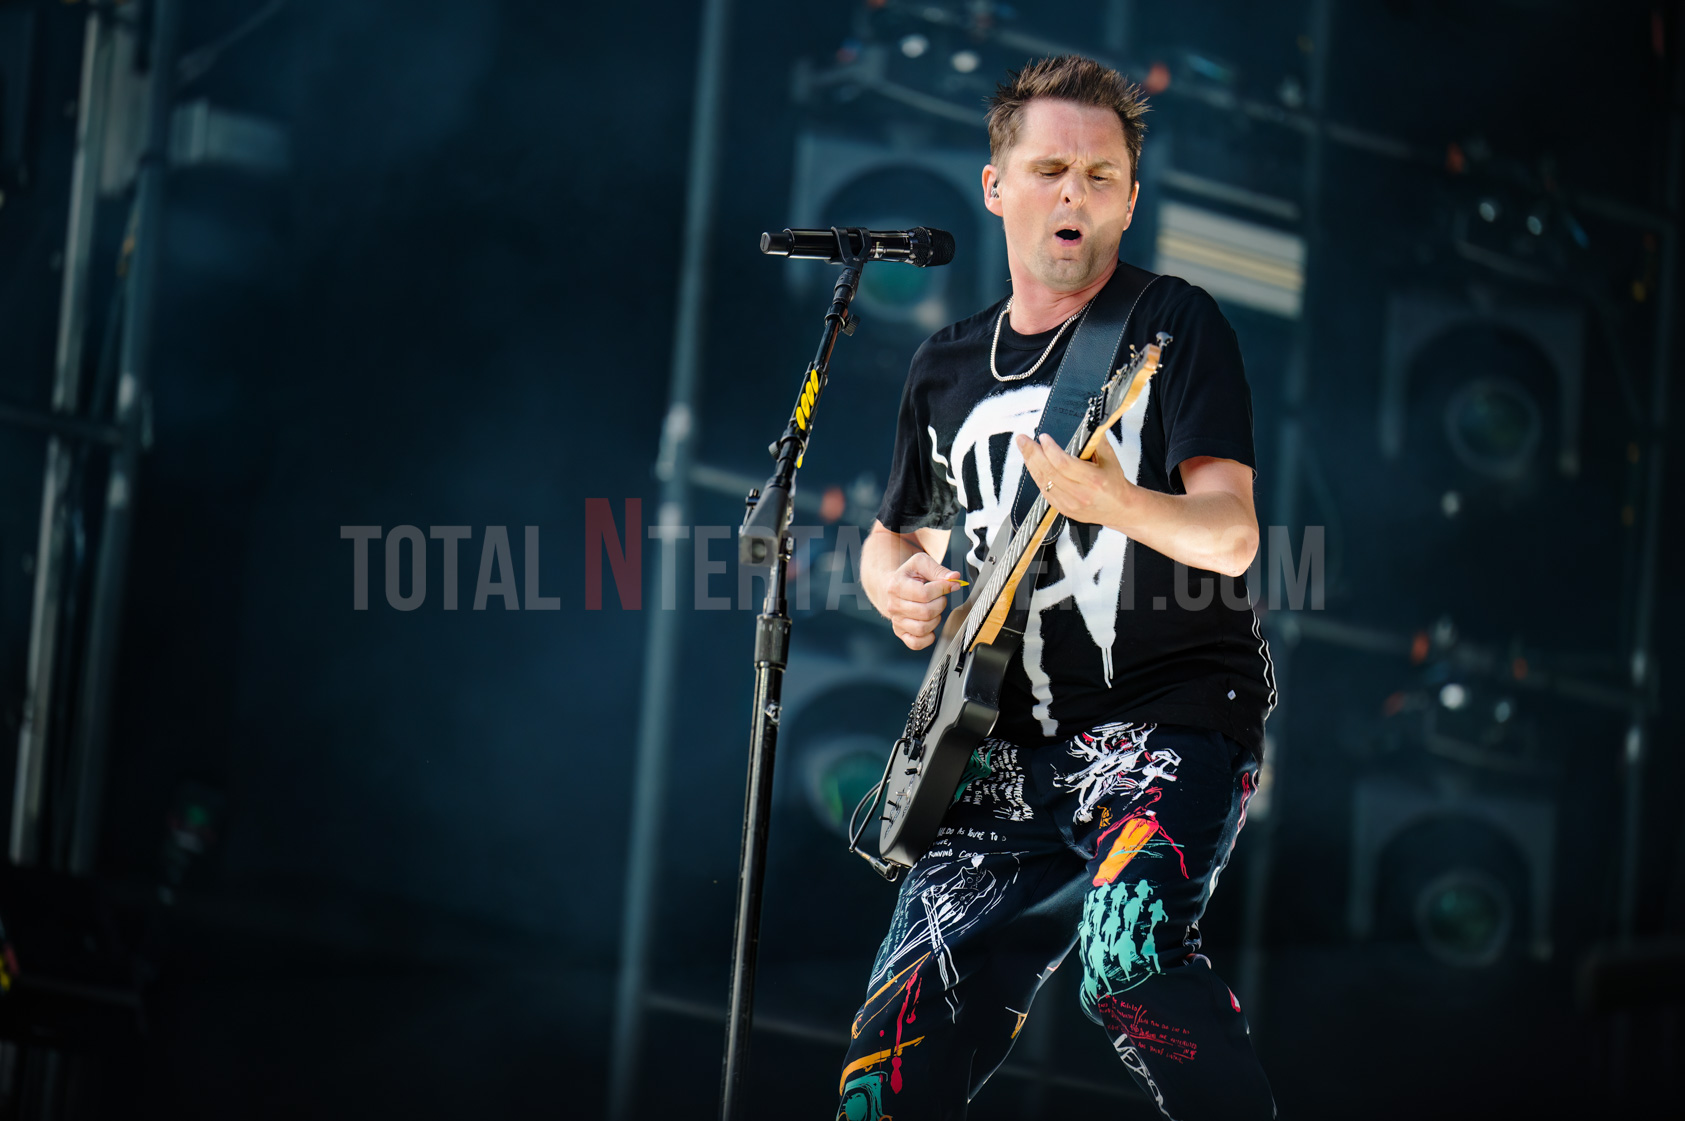 Muse, Huddersfield, Music, Live Event, Gary Mather, TotalNtertainment